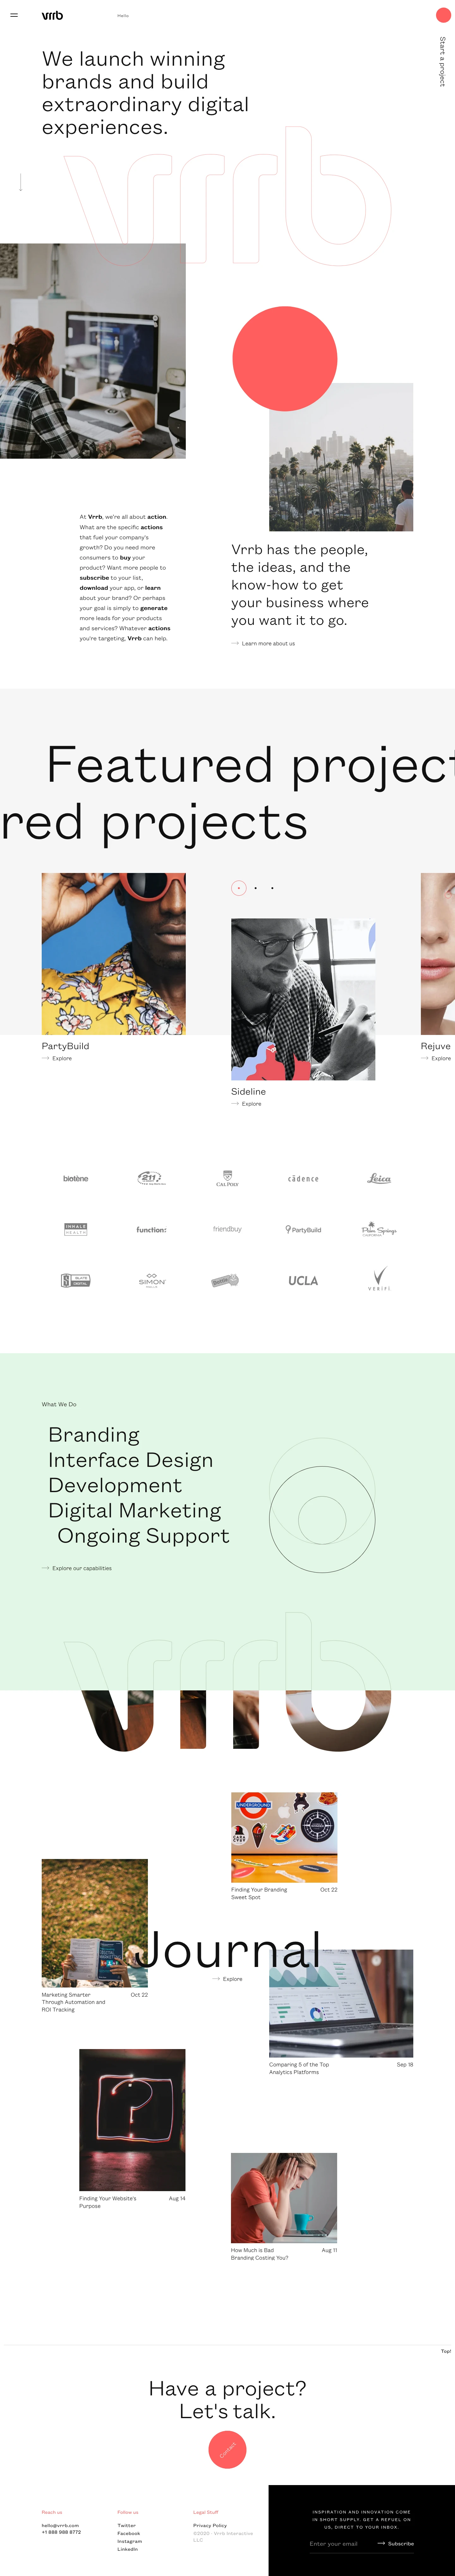 Vrrb Landing Page Example: We’re award-winning designers & web developers in Los Angeles, San Francisco, and Berlin, launching extraordinary brands and building custom experiences.